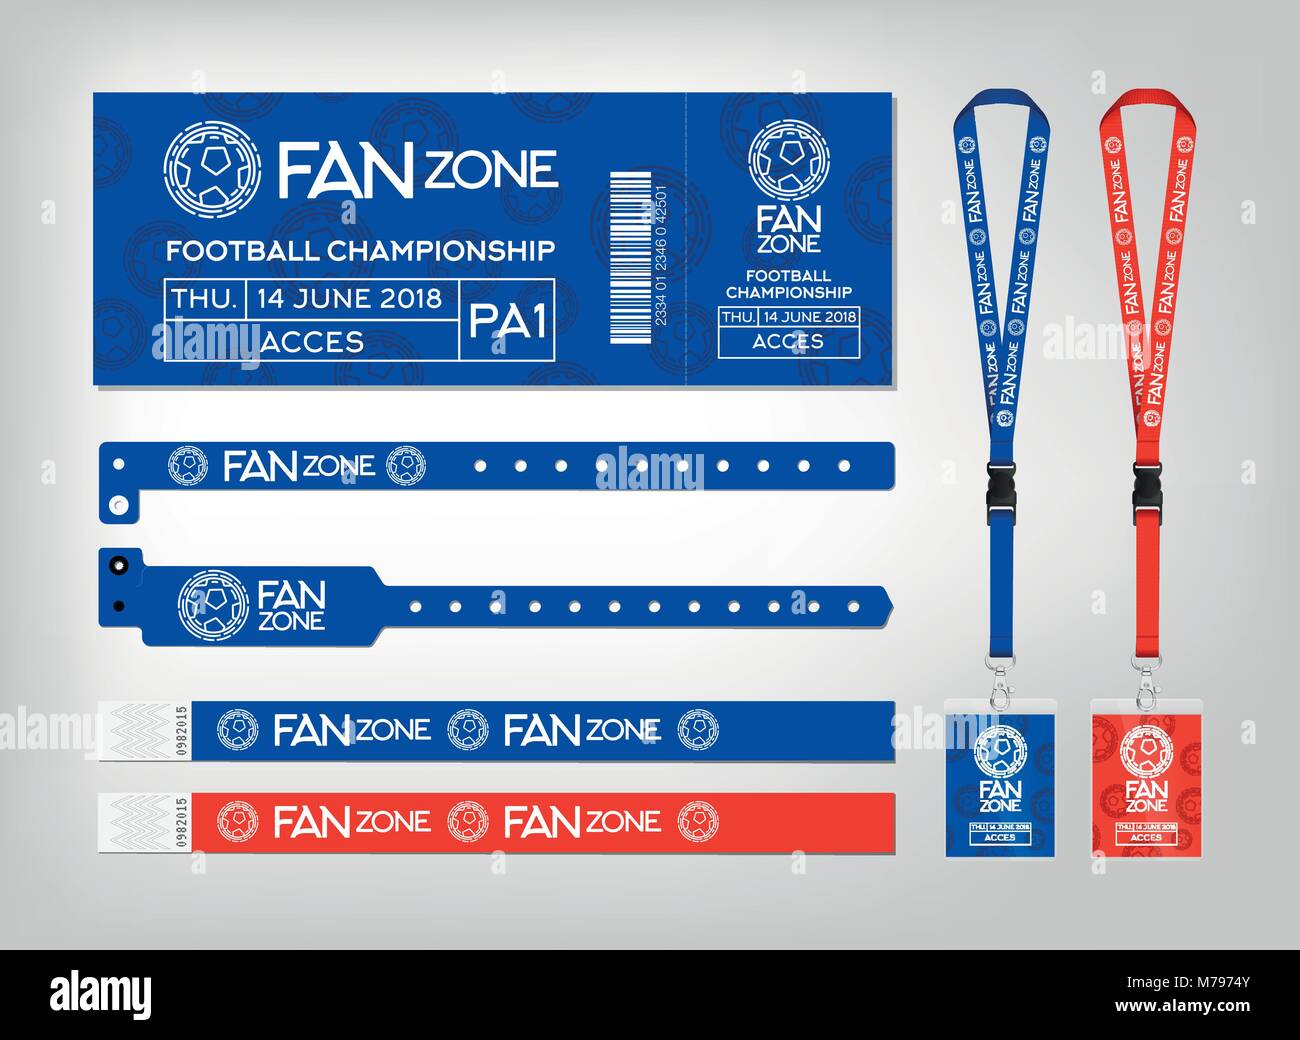 Download Mockup Of Different Access Control Designs Bracelets Ticket And Lanyards Design For Fan Zone Football Event Vector Template Stock Vector Image Art Alamy